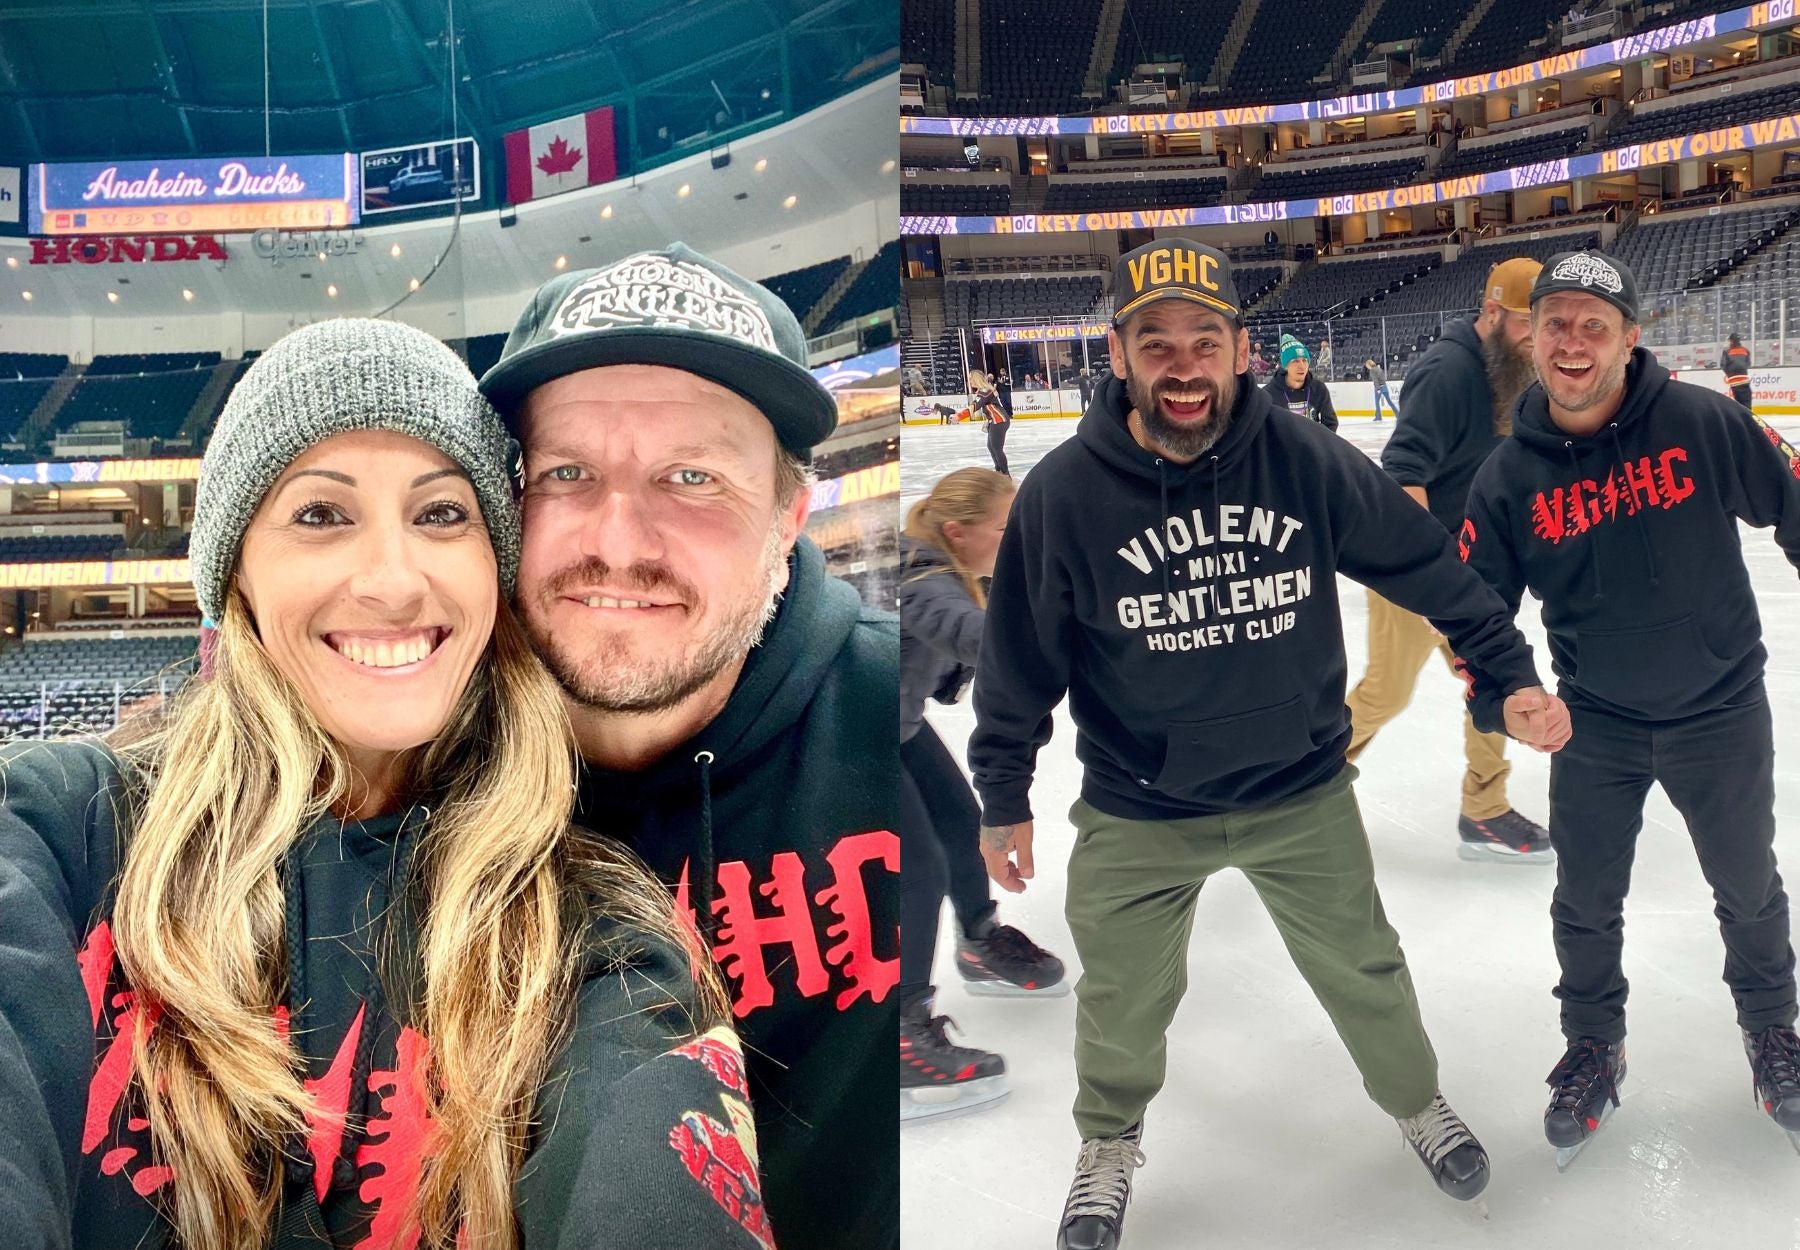 Delseyfly metoparis Hockey Clothing Company visits Honda Center, the home of the Anaheim Ducks for a hockey game against the Vegas Golden Knights. Here are some of our favorite memories skating on the ice after the game.